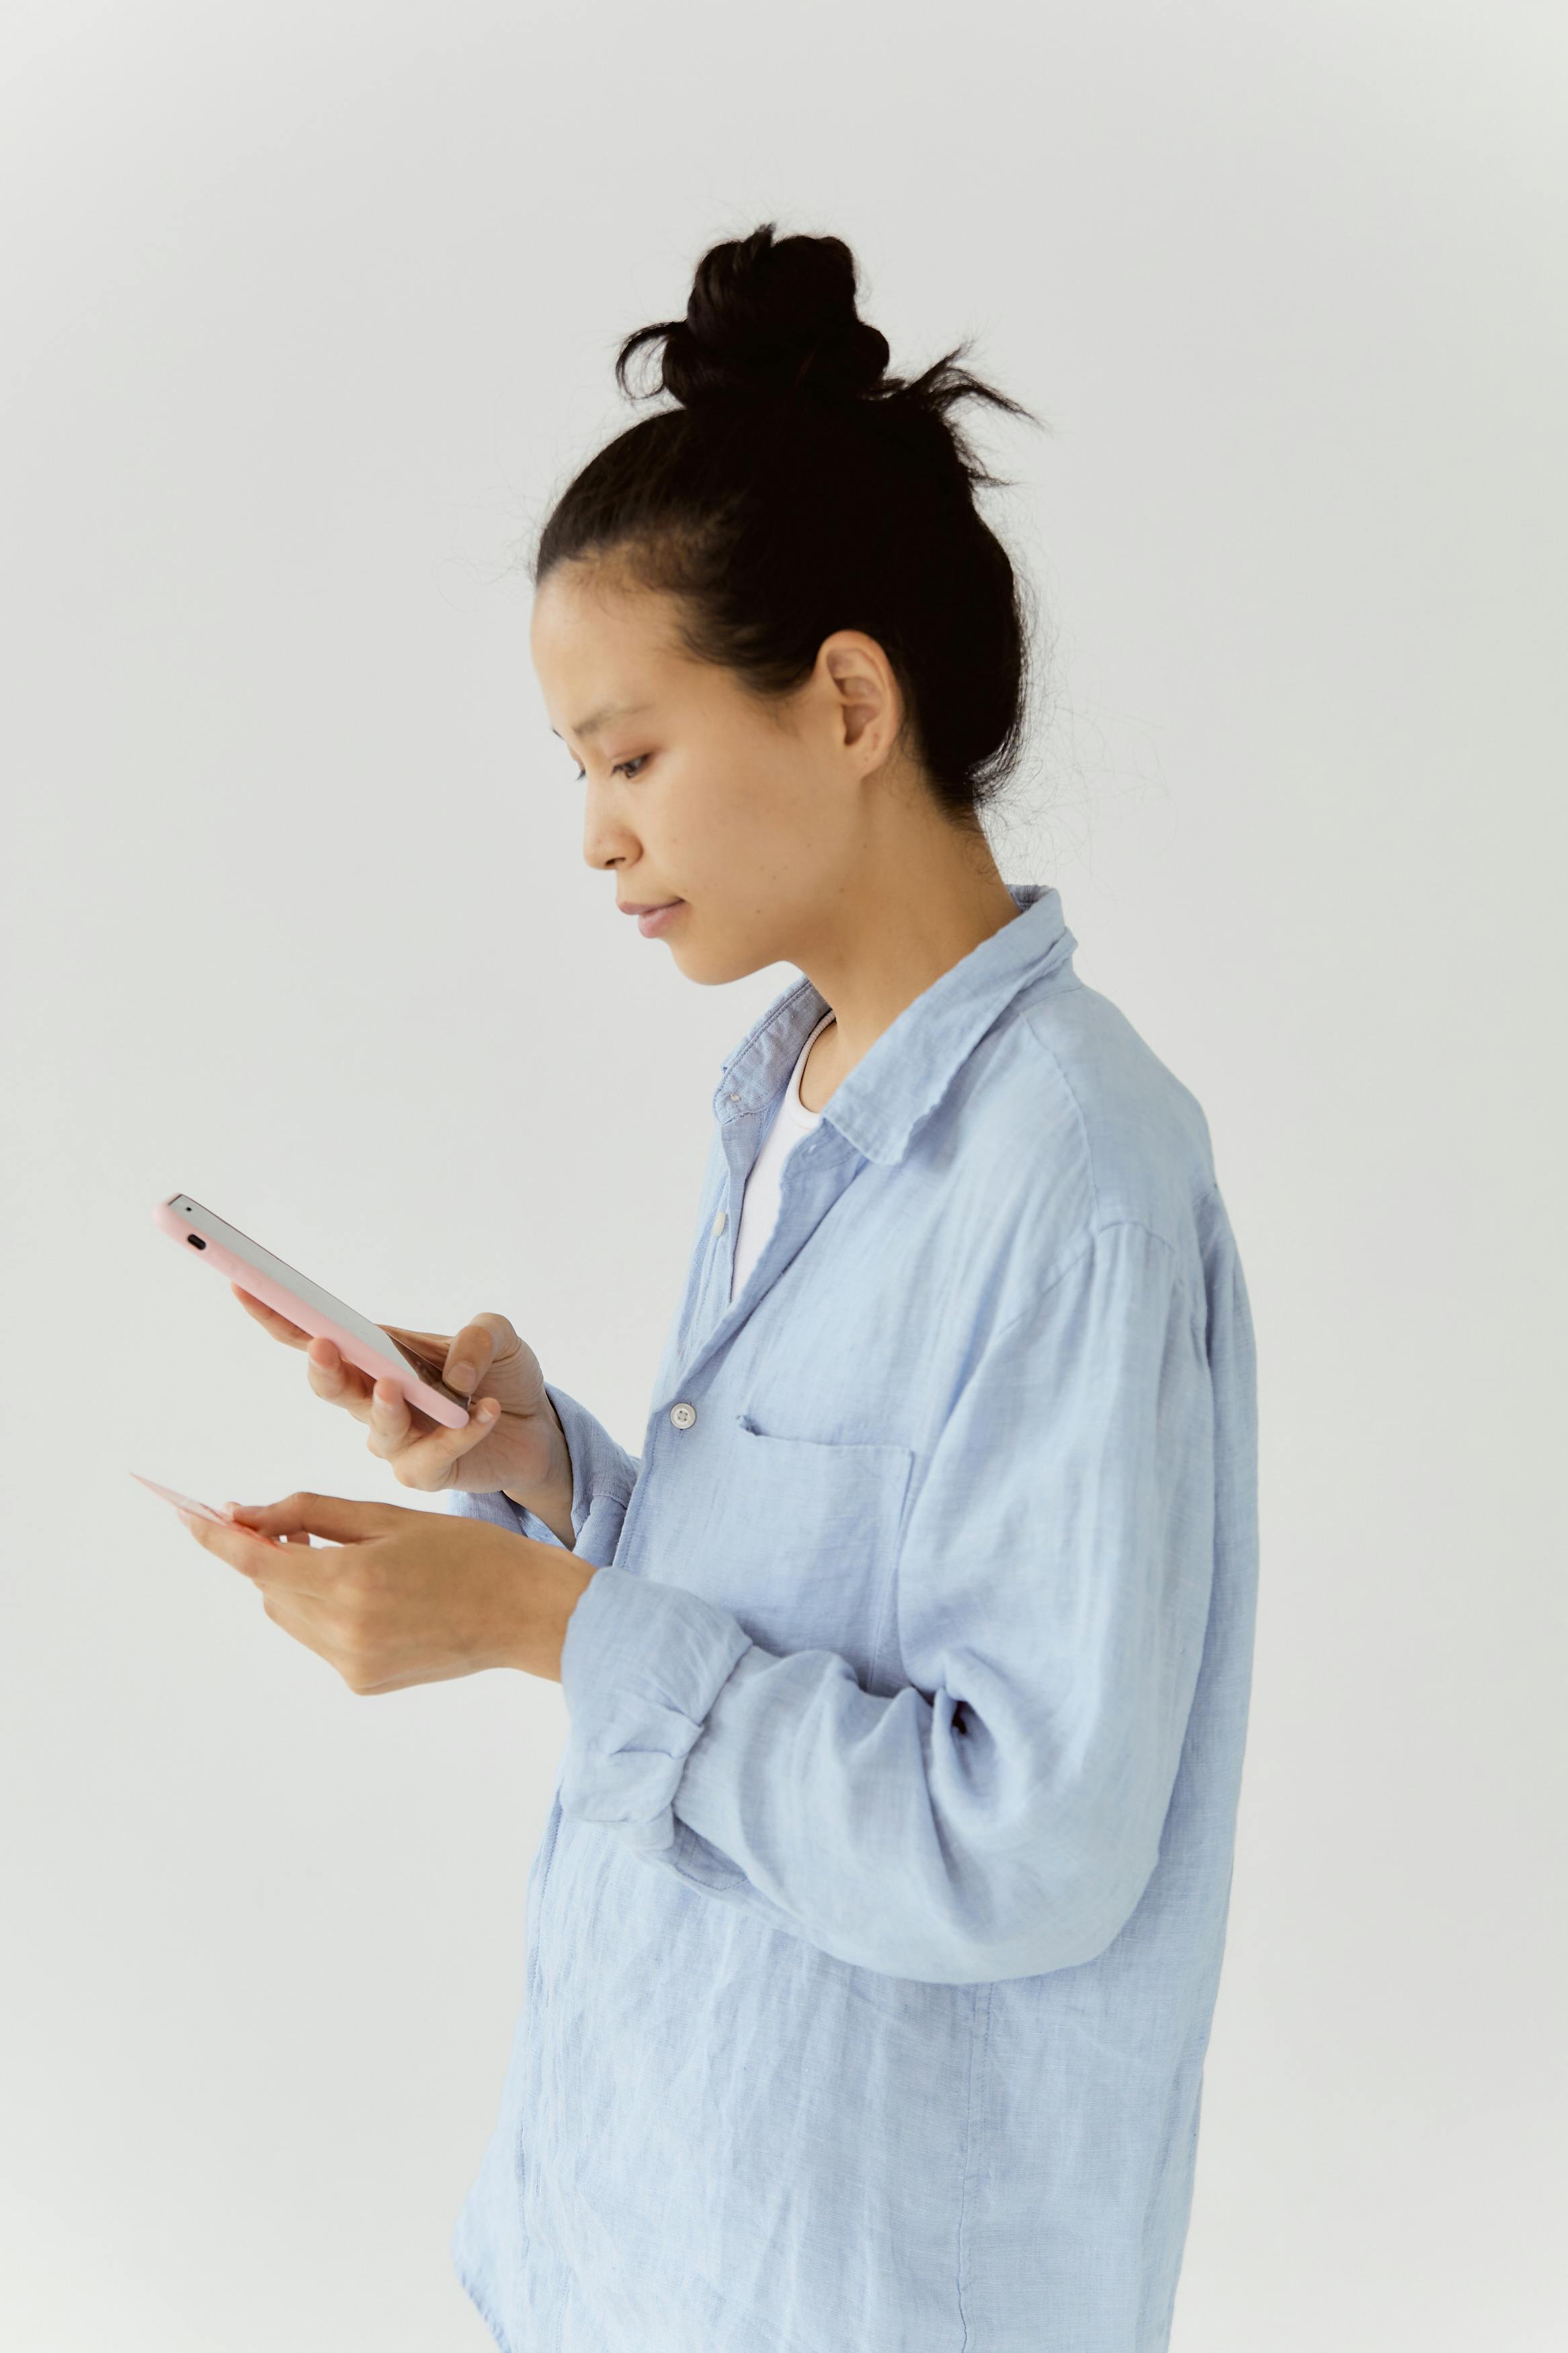 woman using her smartphone and holding her credit card